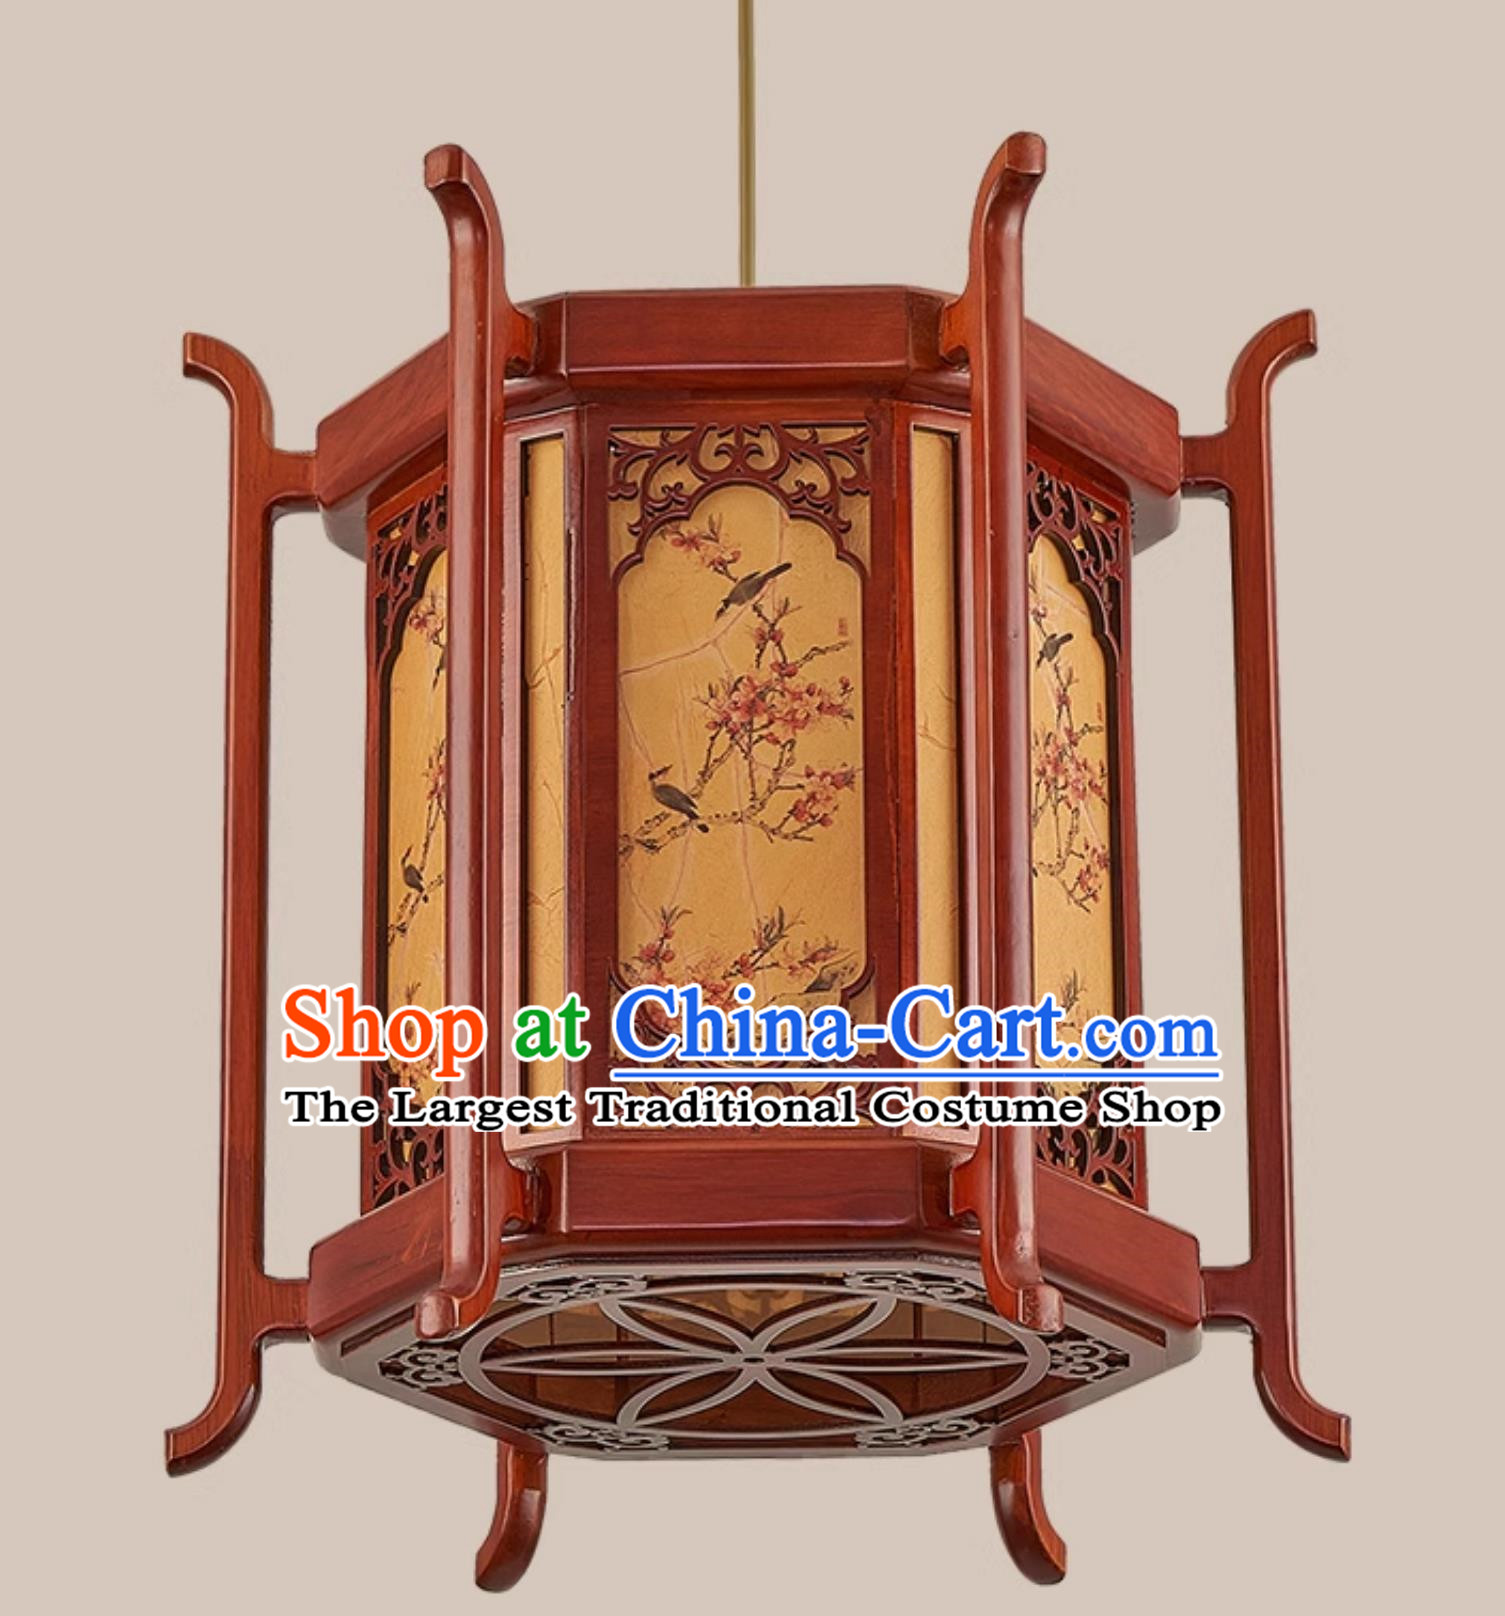 24 Inches Diameter Chinese Antique Chandelier Classical Lantern Solid Wood Lamp